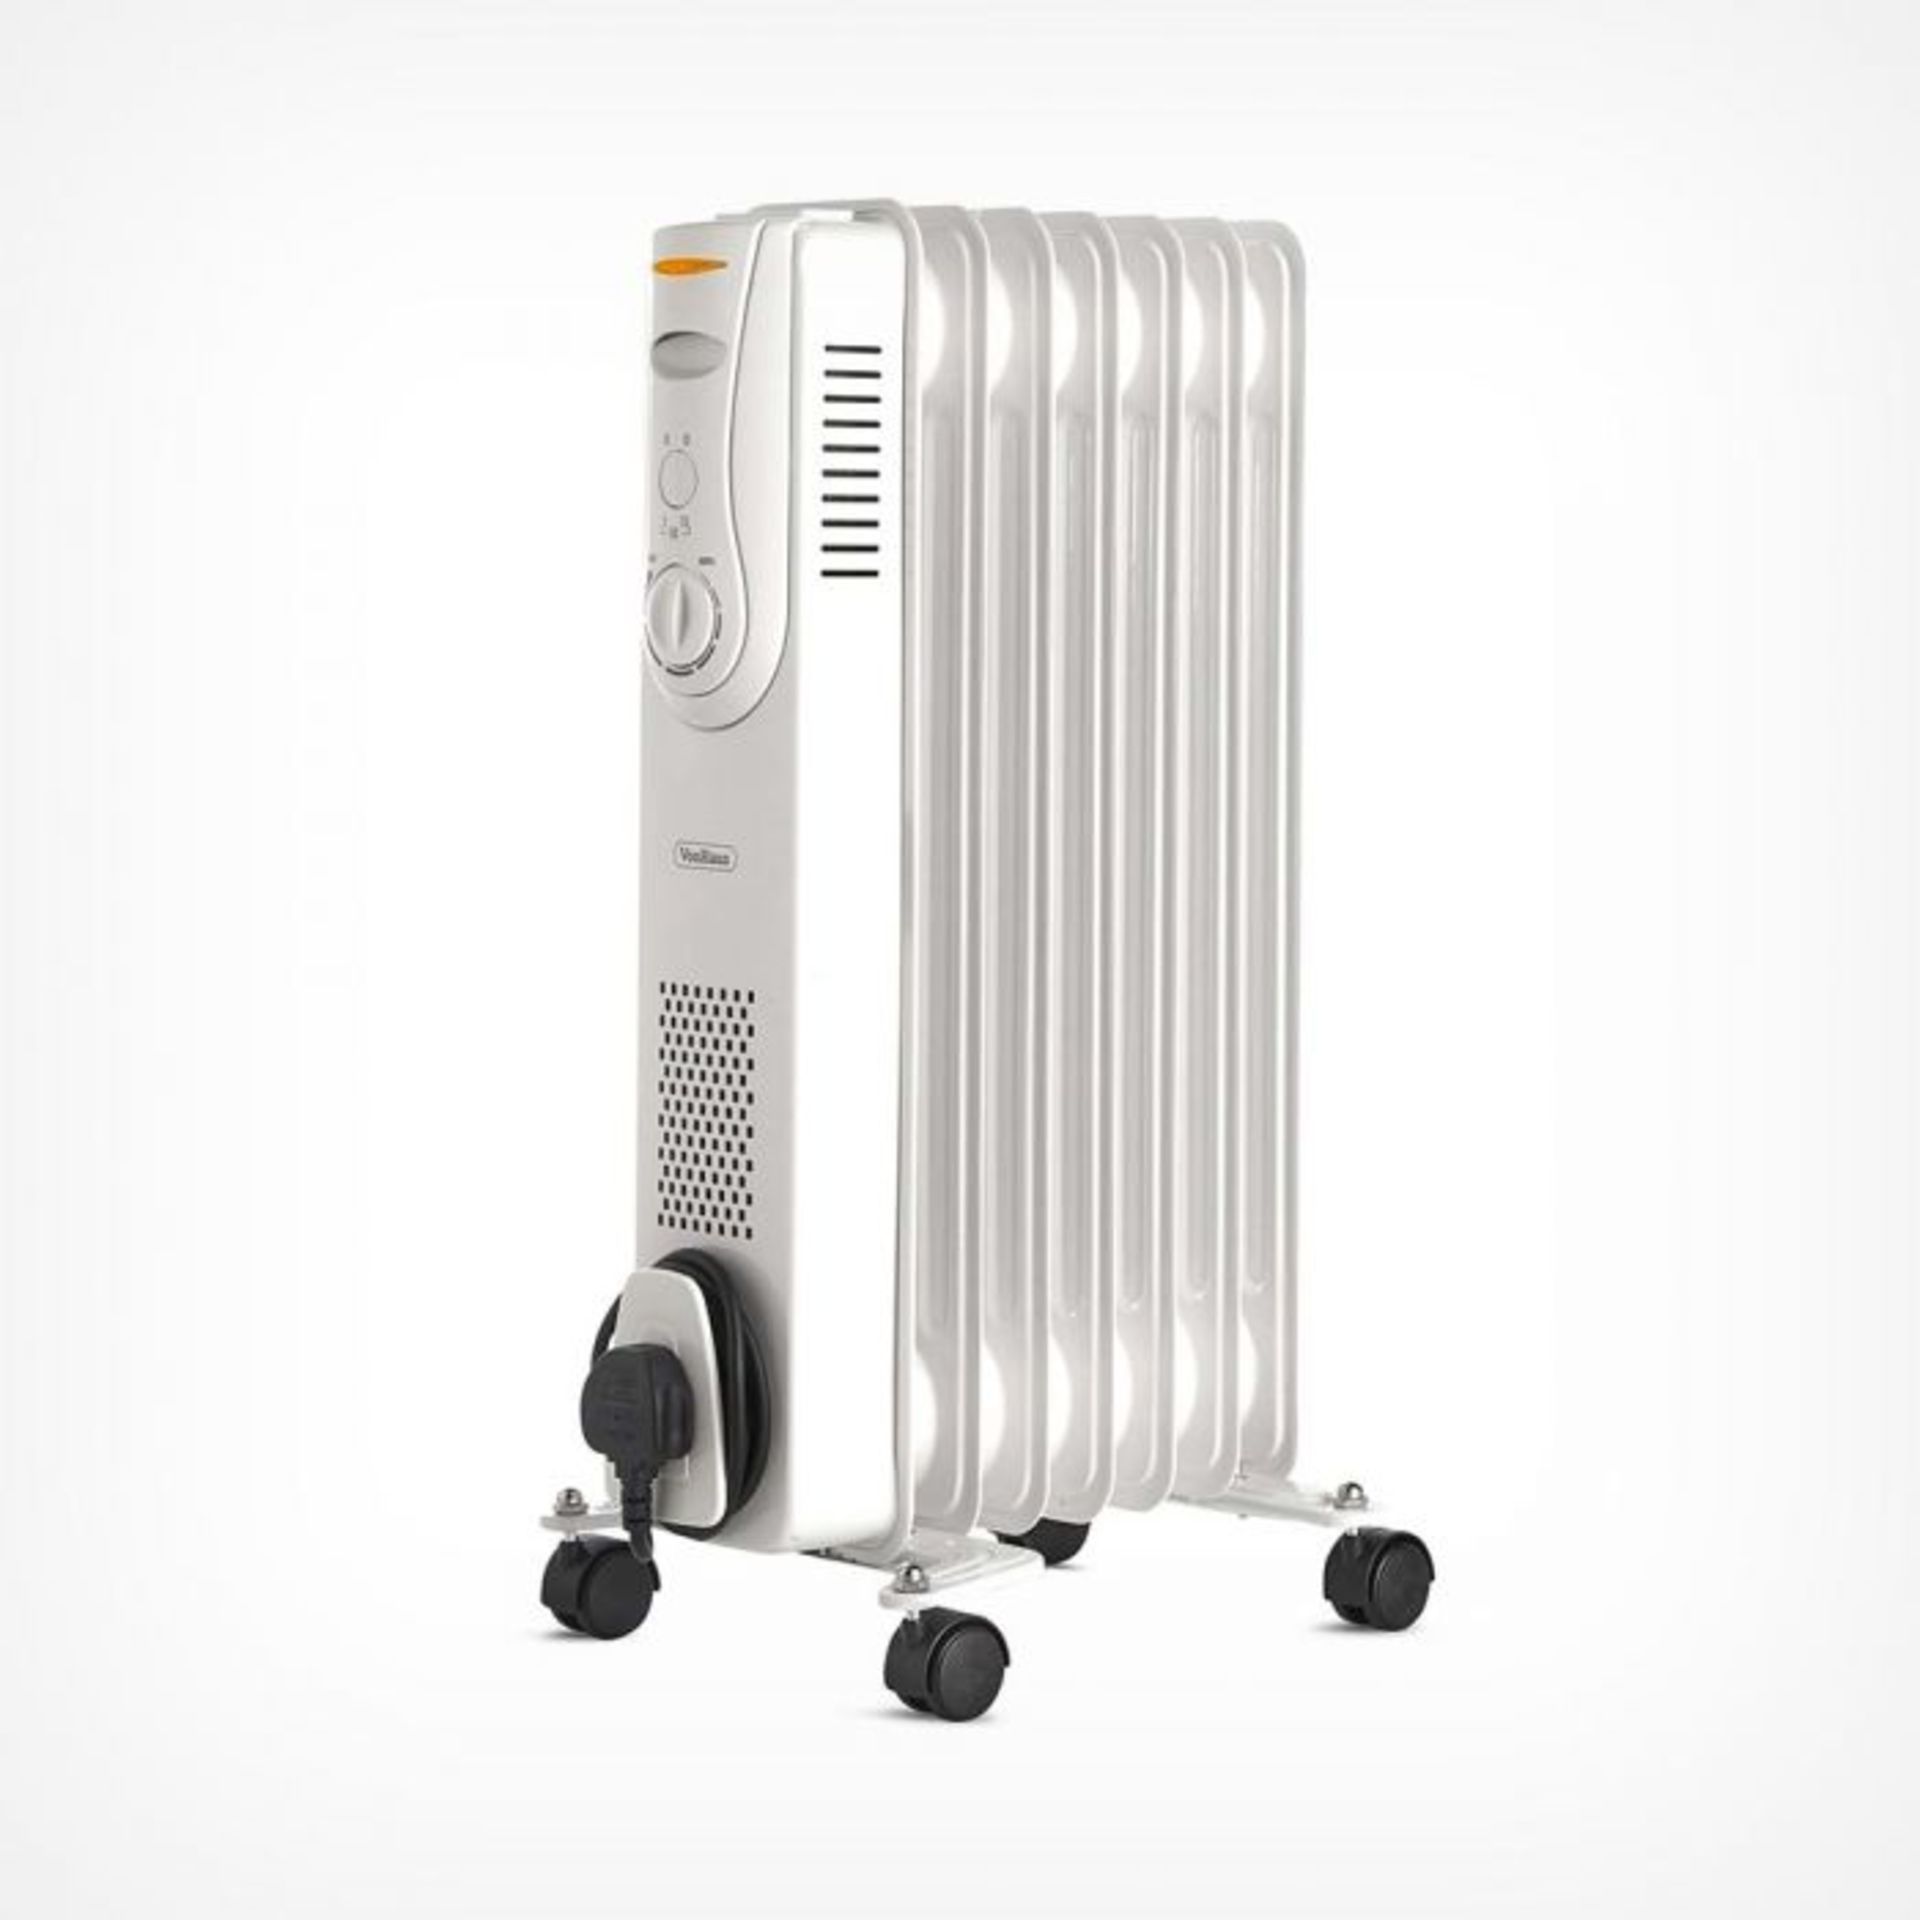 (V179) 7 Fin 1500W Oil Filled Radiator - White Powerful 1500W radiator with 7 oil-filled fins ... - Image 2 of 4